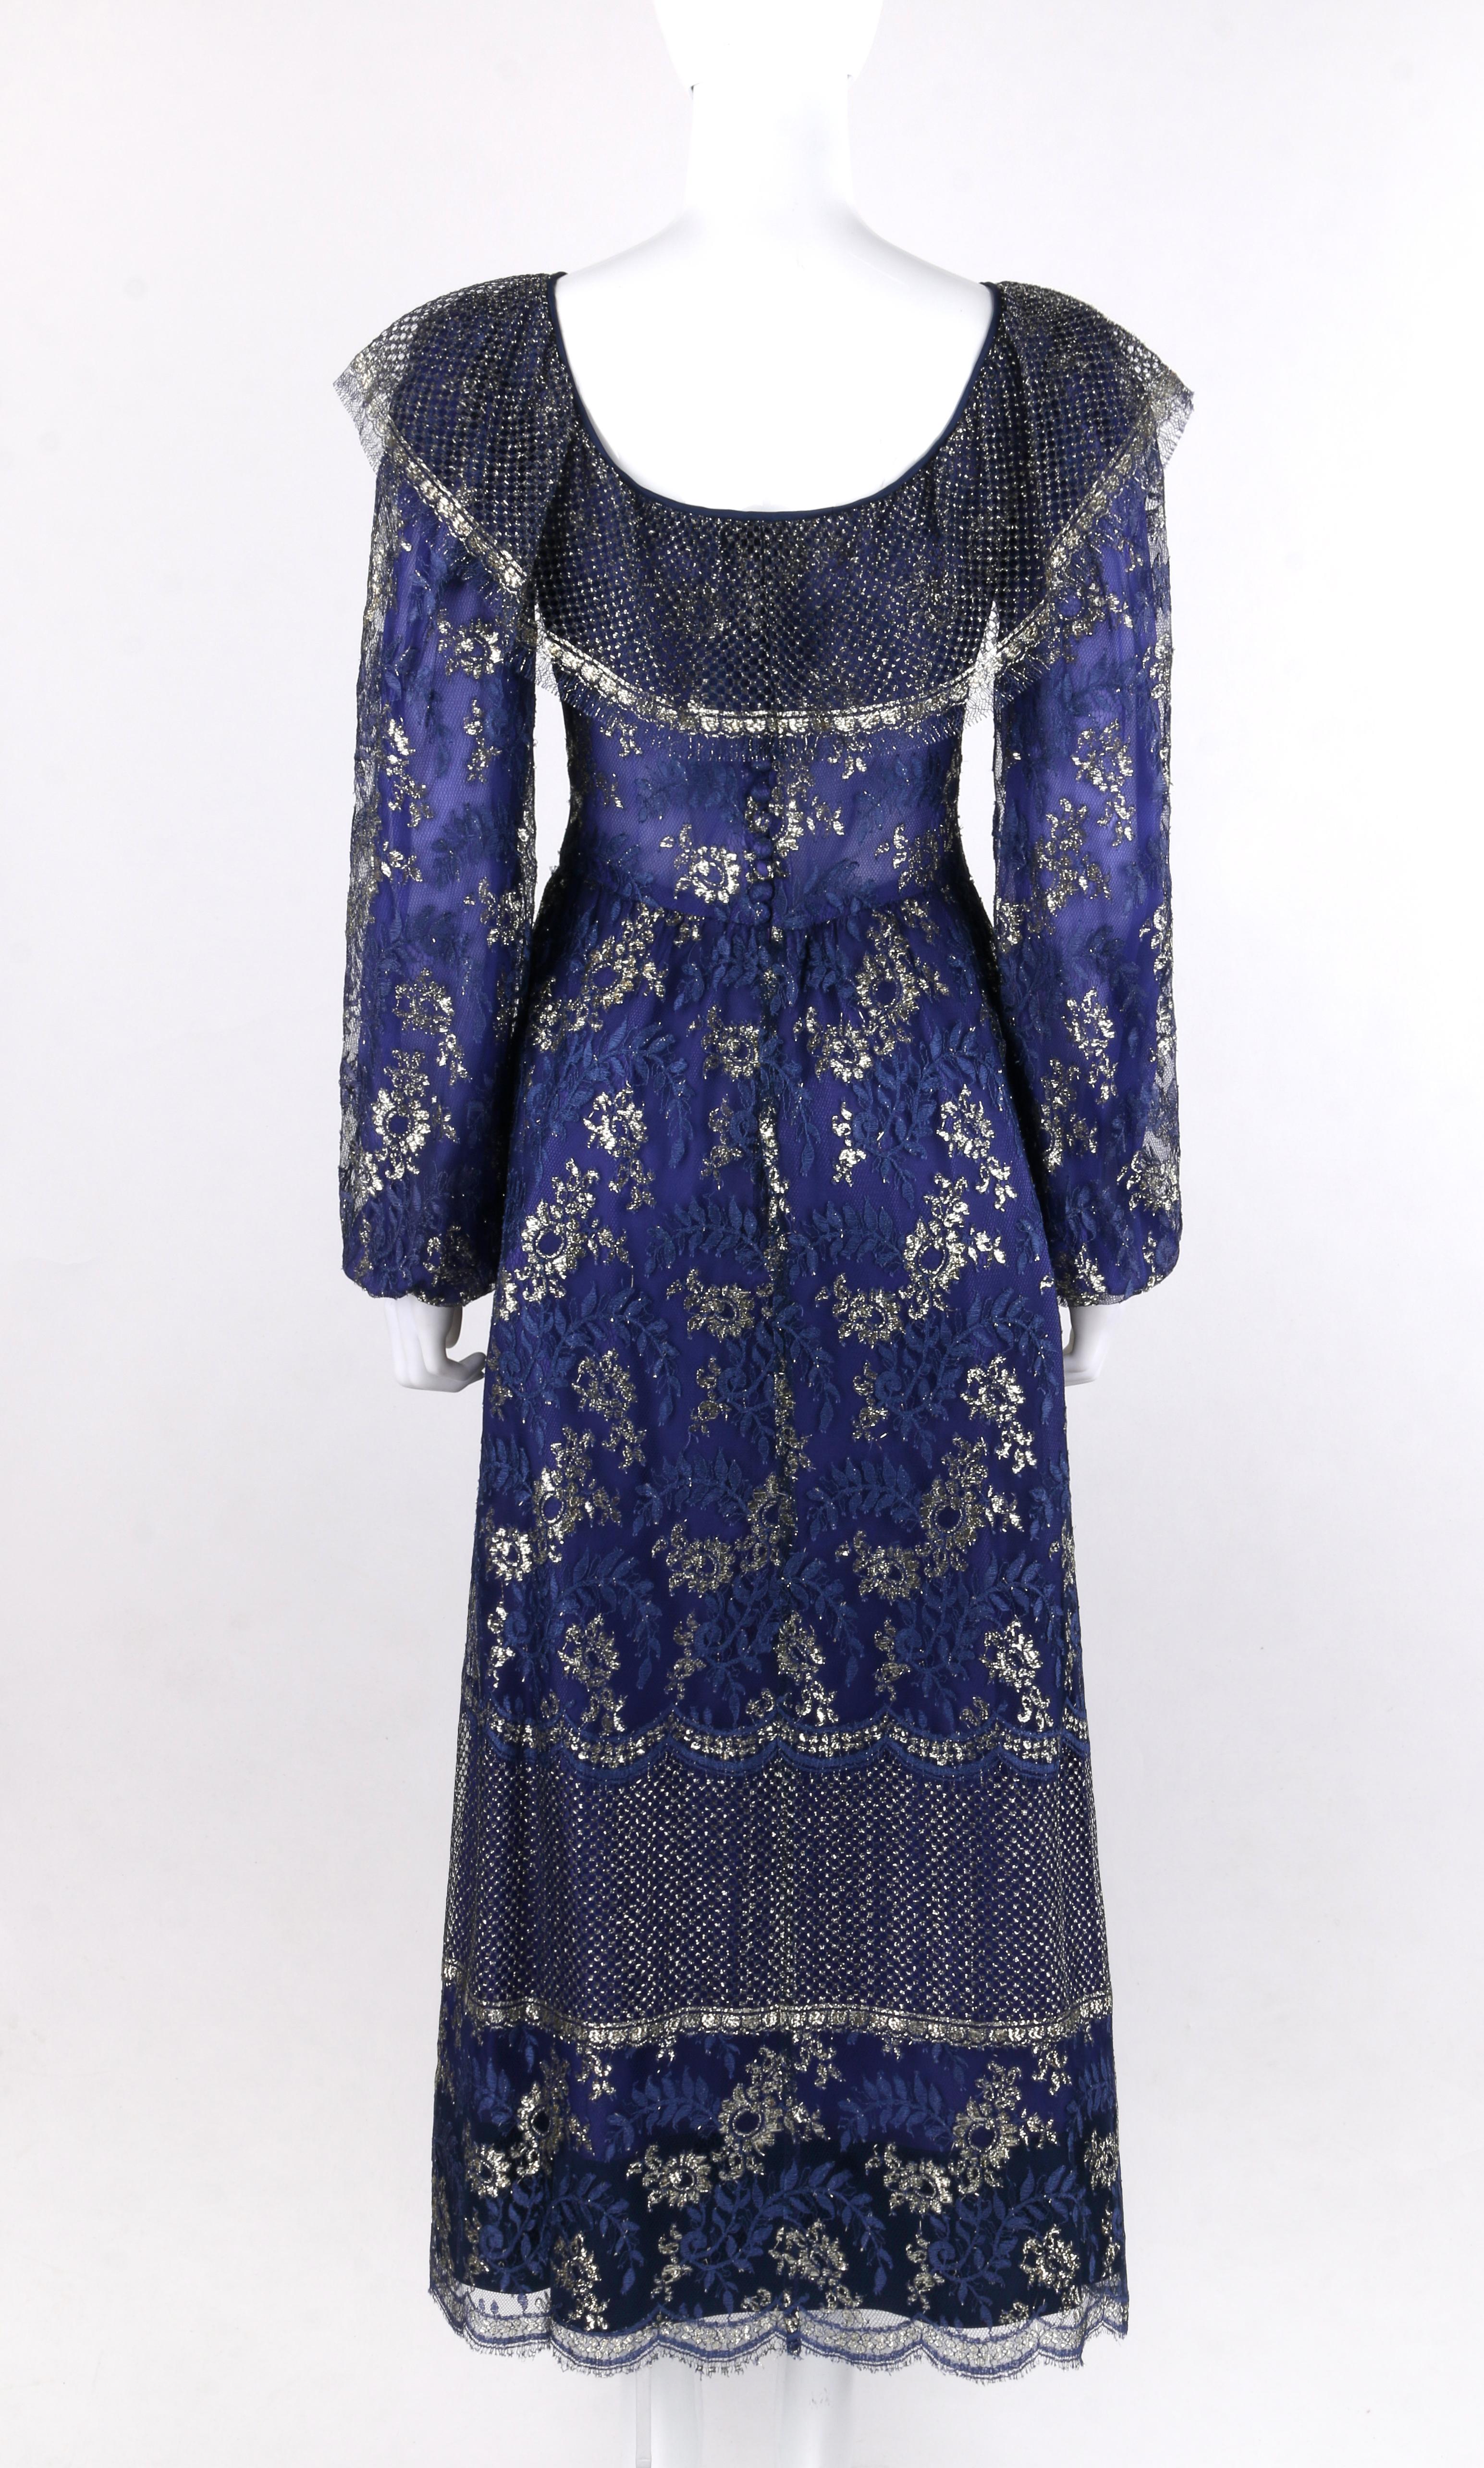 LANVIN Haute Couture c.1970s Periwinkle Gold Floral Lace Overlay Maxi Dress In Good Condition For Sale In Thiensville, WI